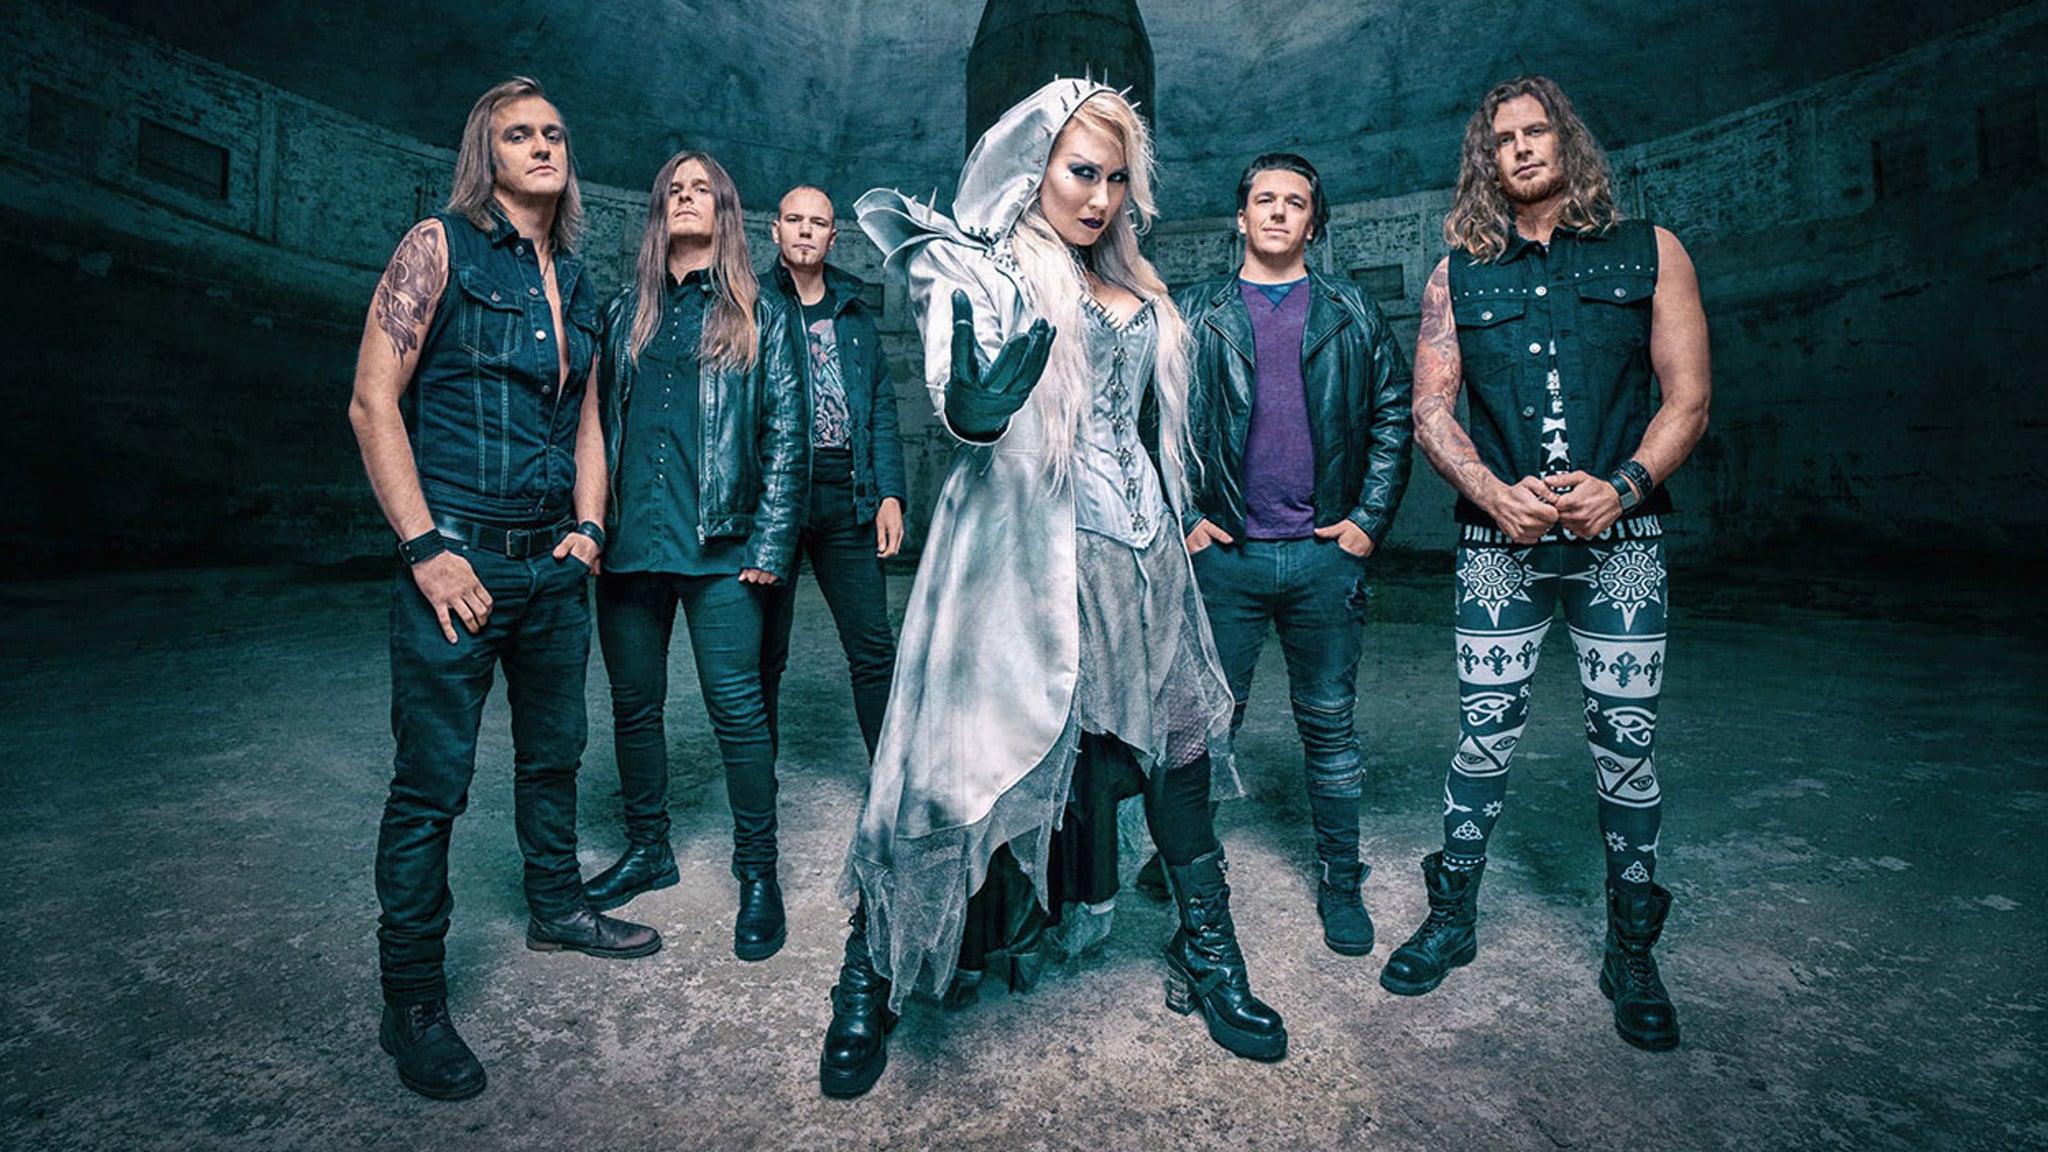 Battle Beast Circus Of Doom Over North America presale password for show tickets in Chicago, IL (House of Blues Chicago)